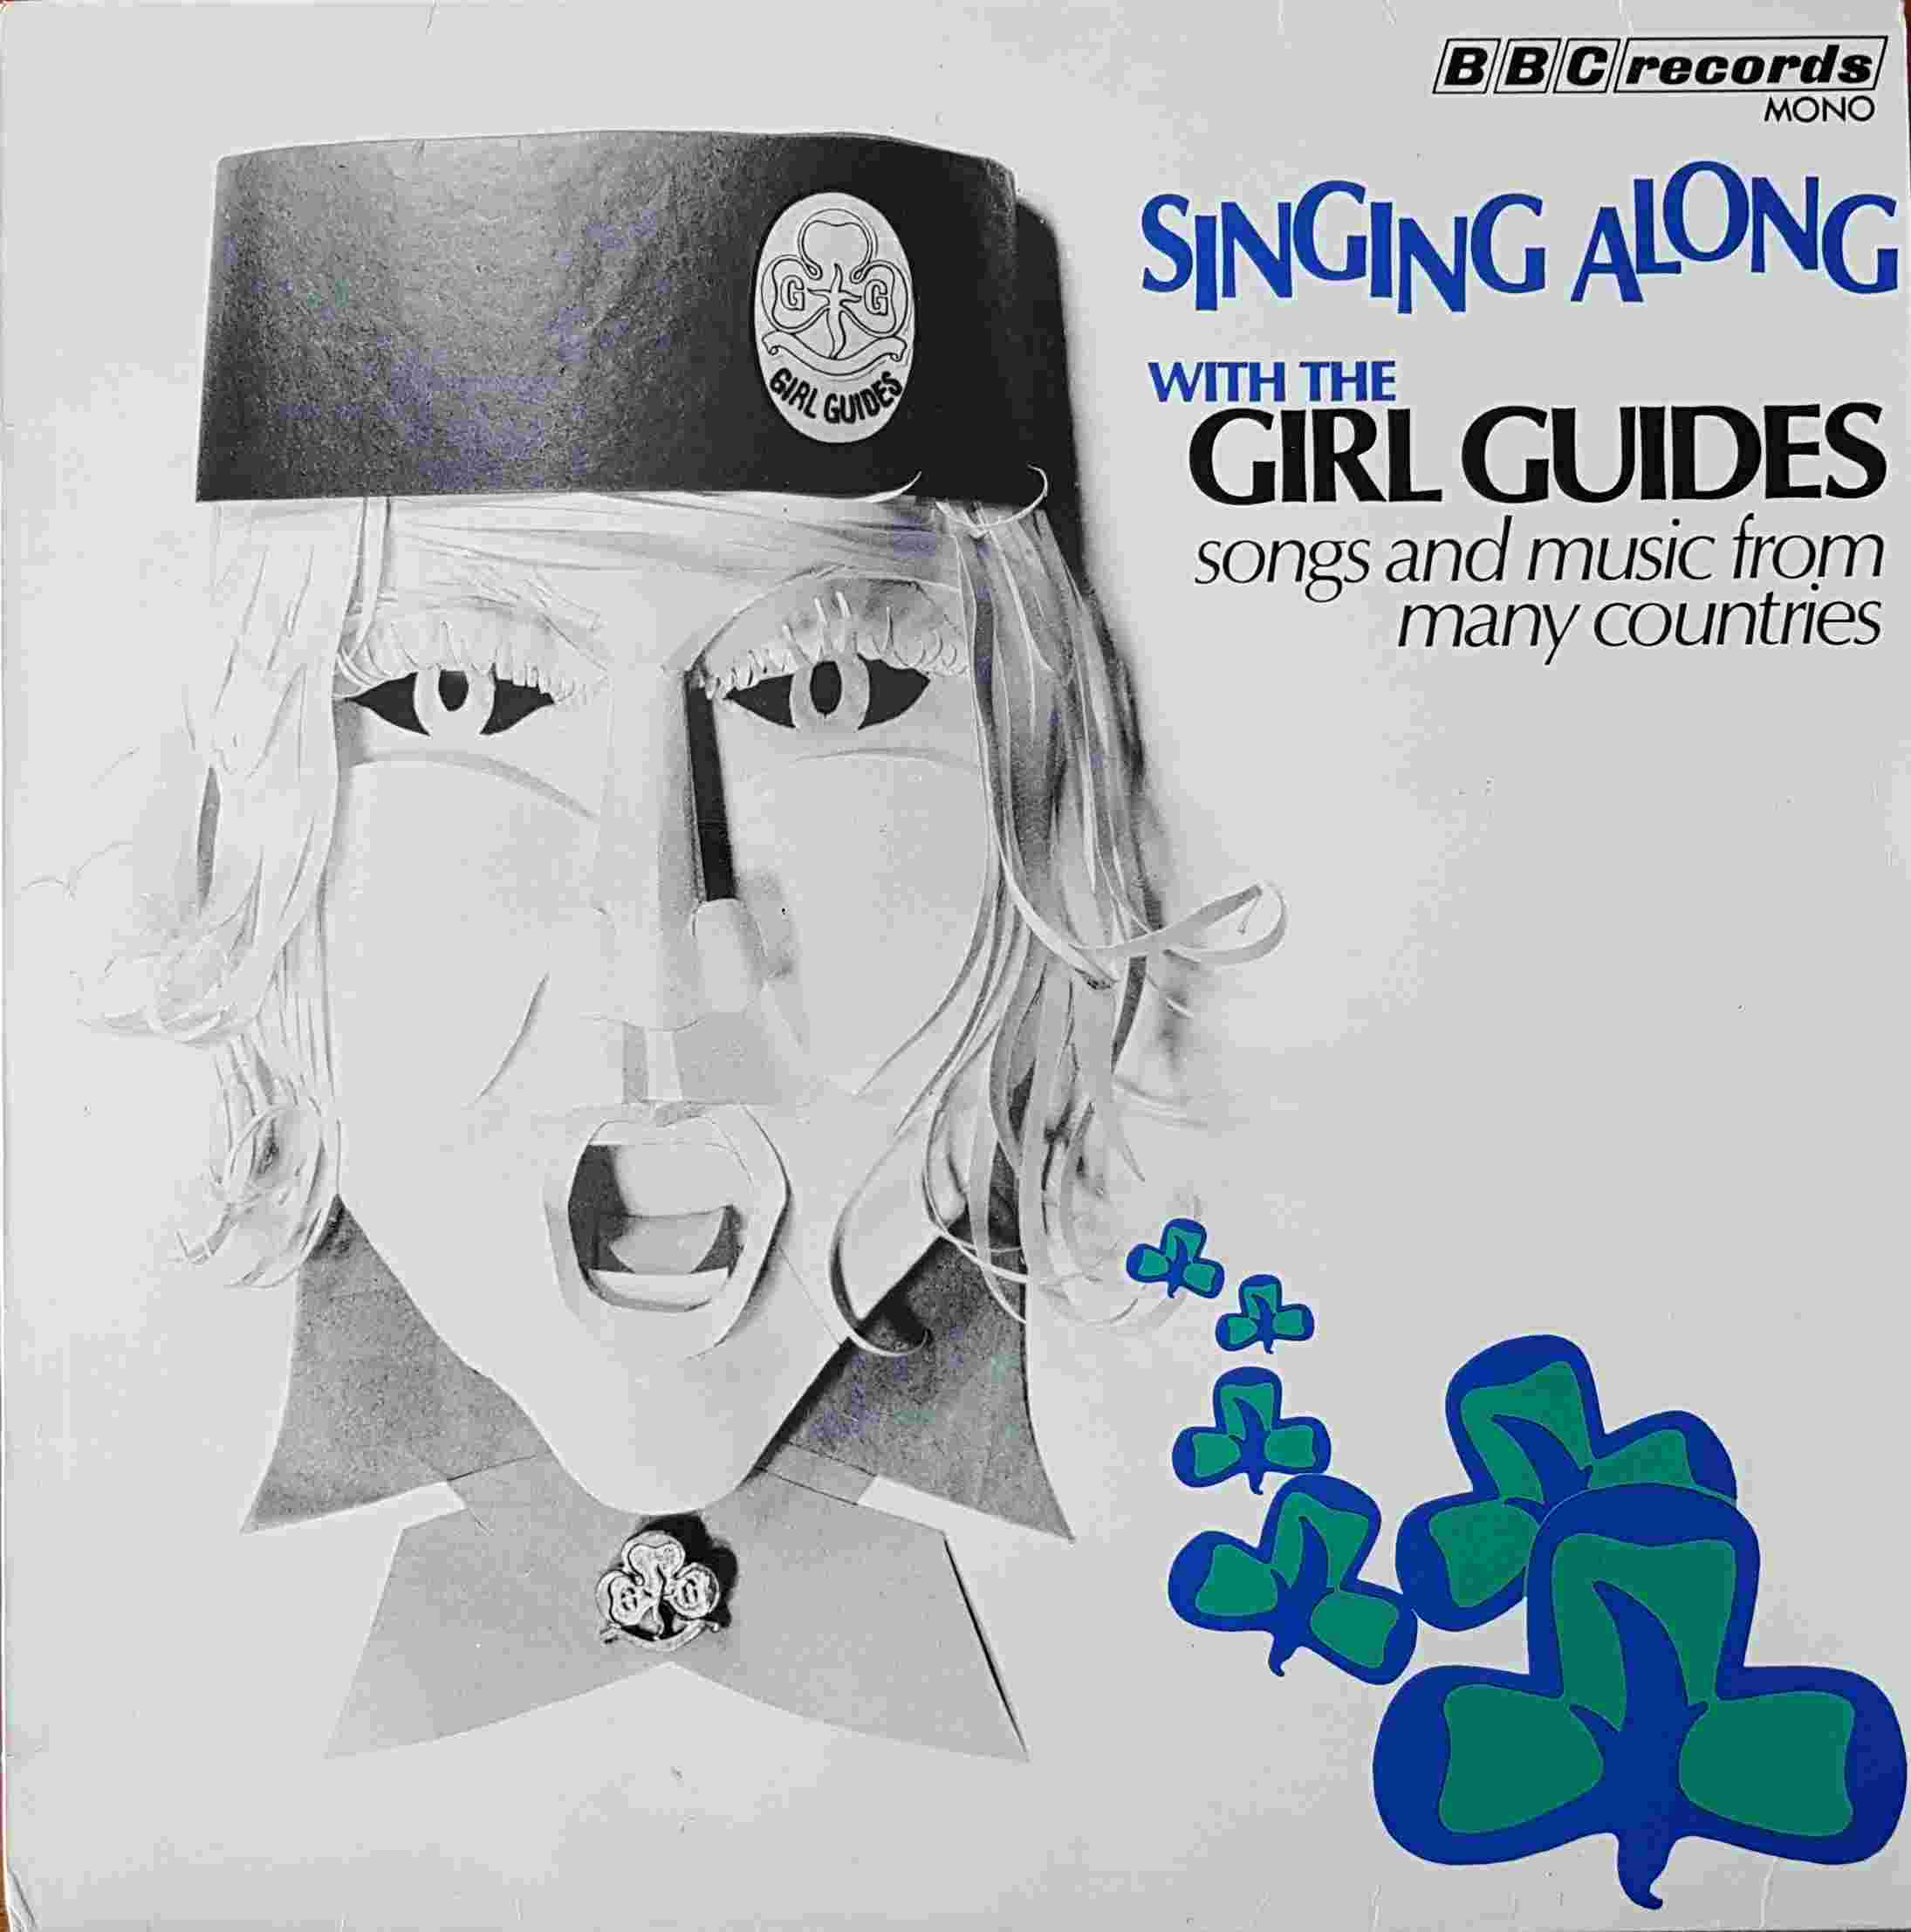 Picture of RED 67 Sing along with the Girl Guides by artist Various from the BBC albums - Records and Tapes library